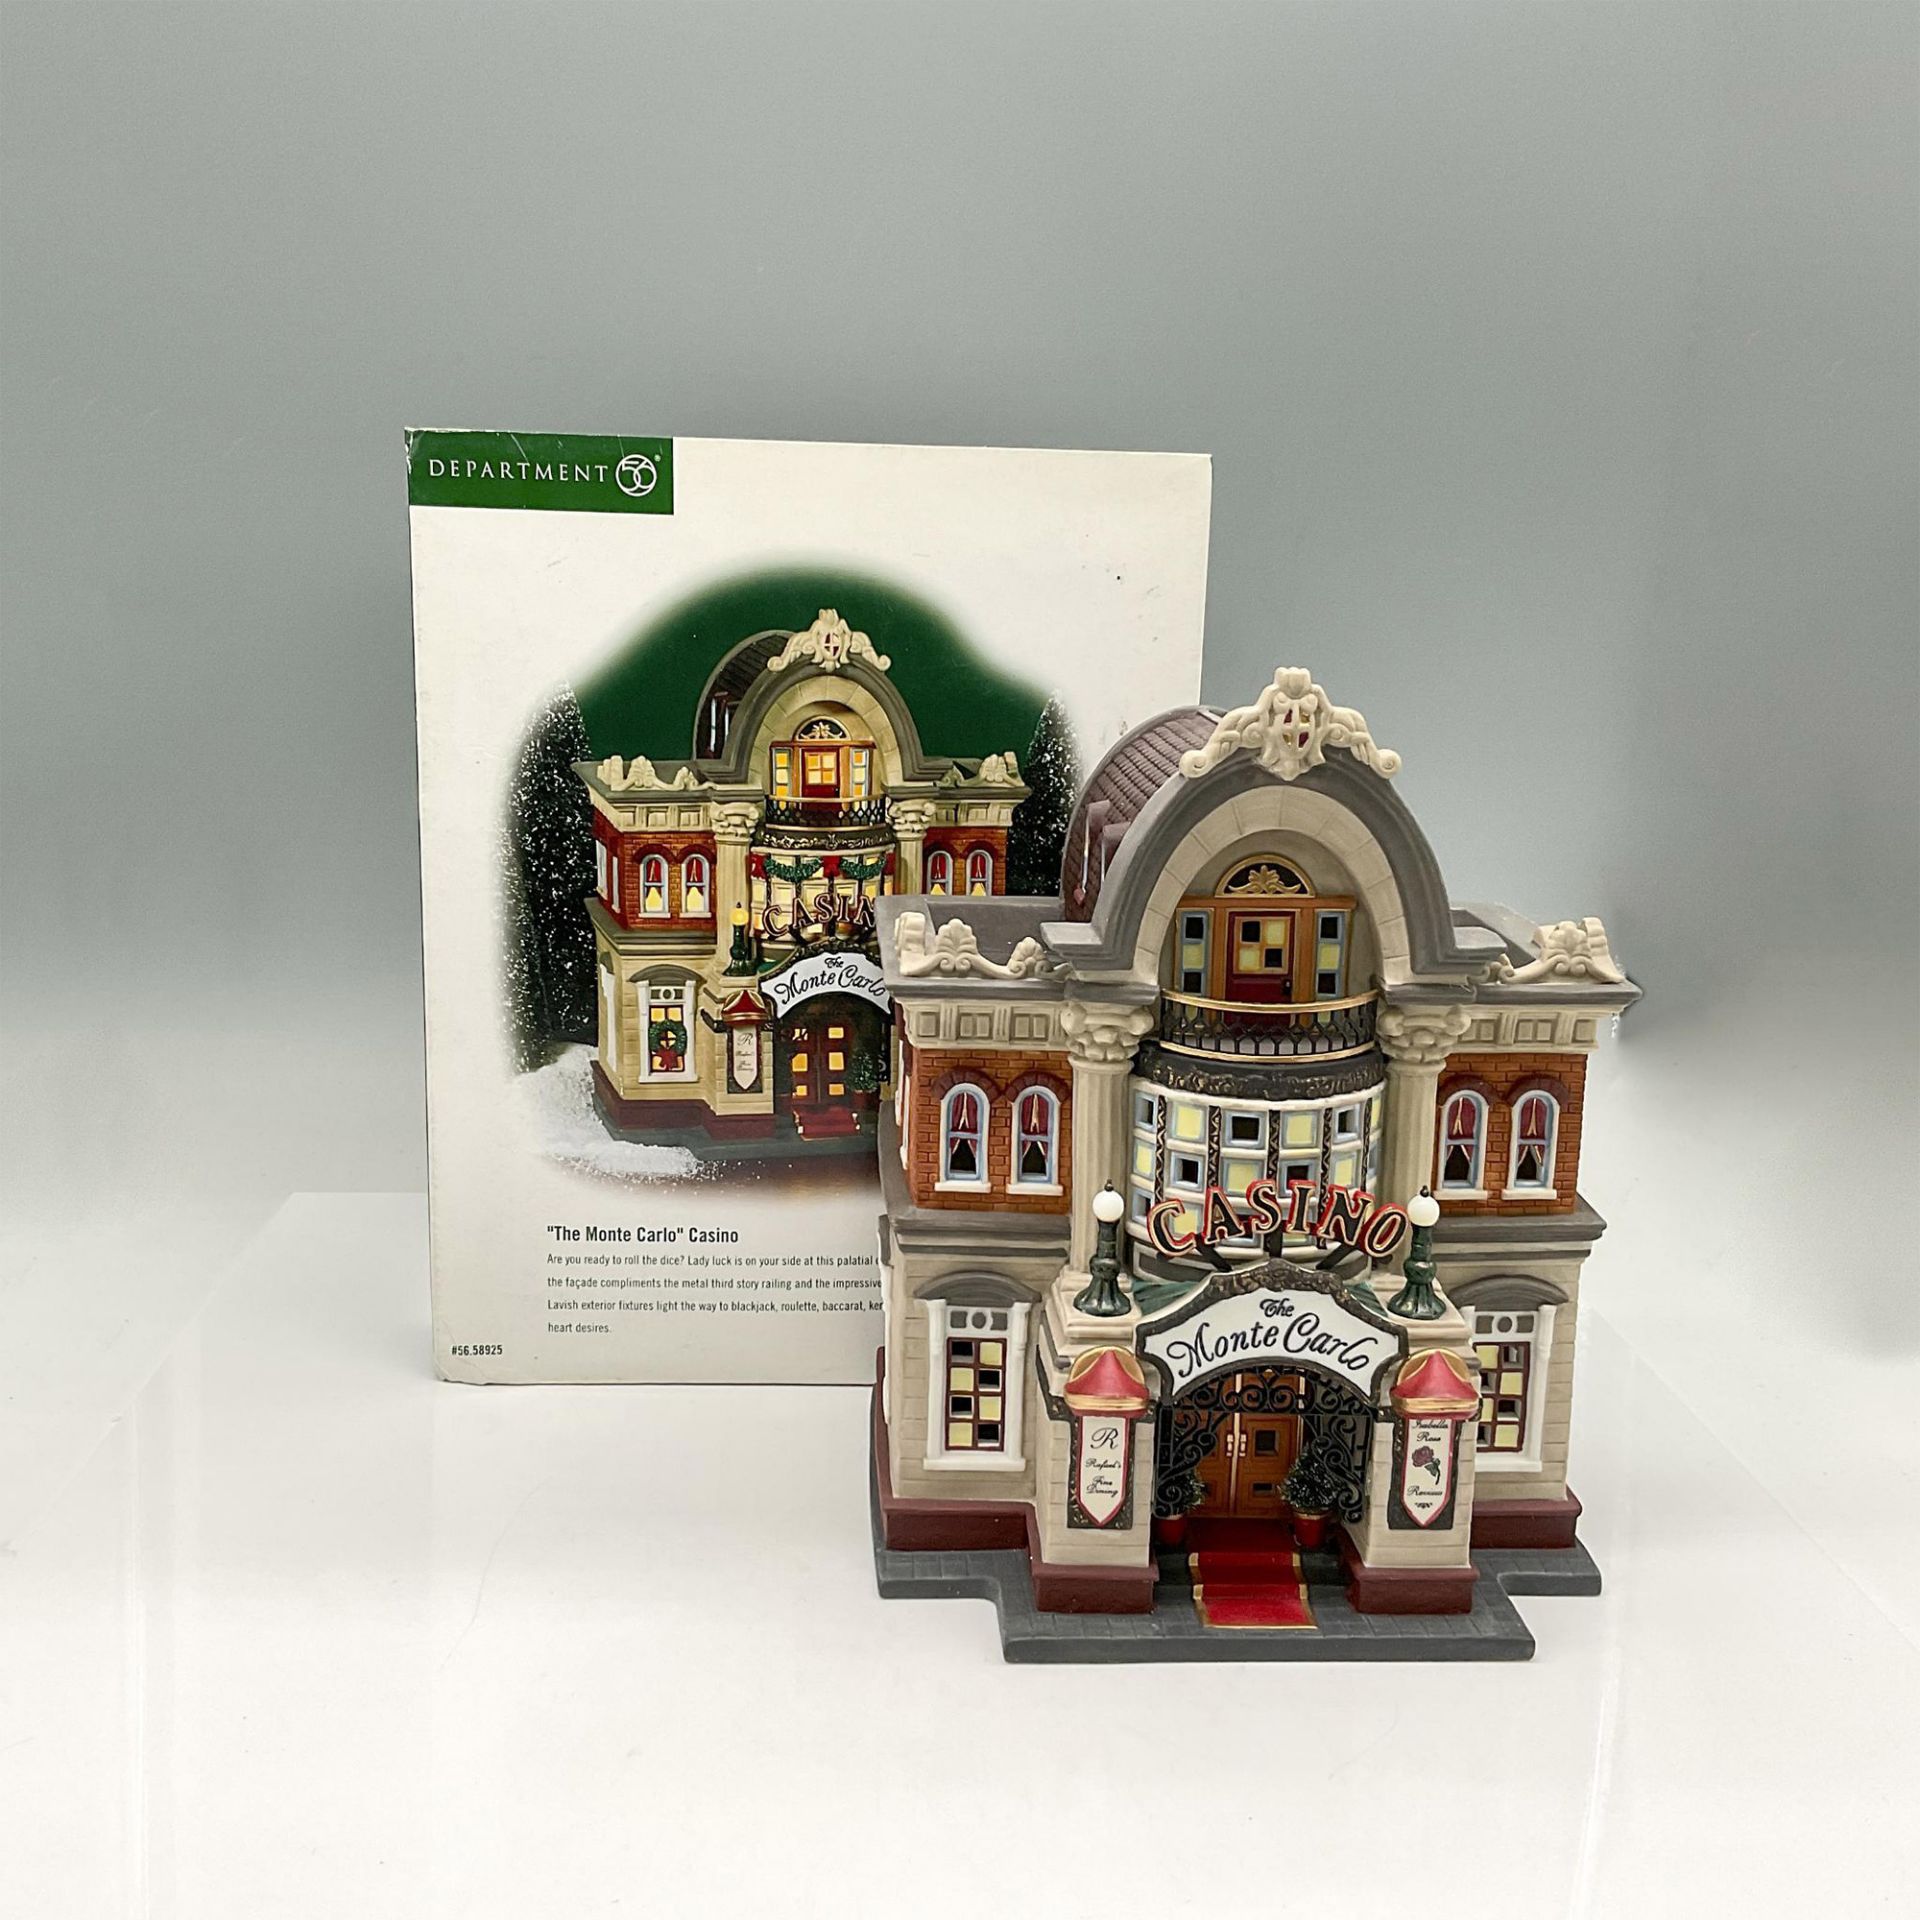 Department 56 Porcelain The Monte Carlo Casino - Image 6 of 6